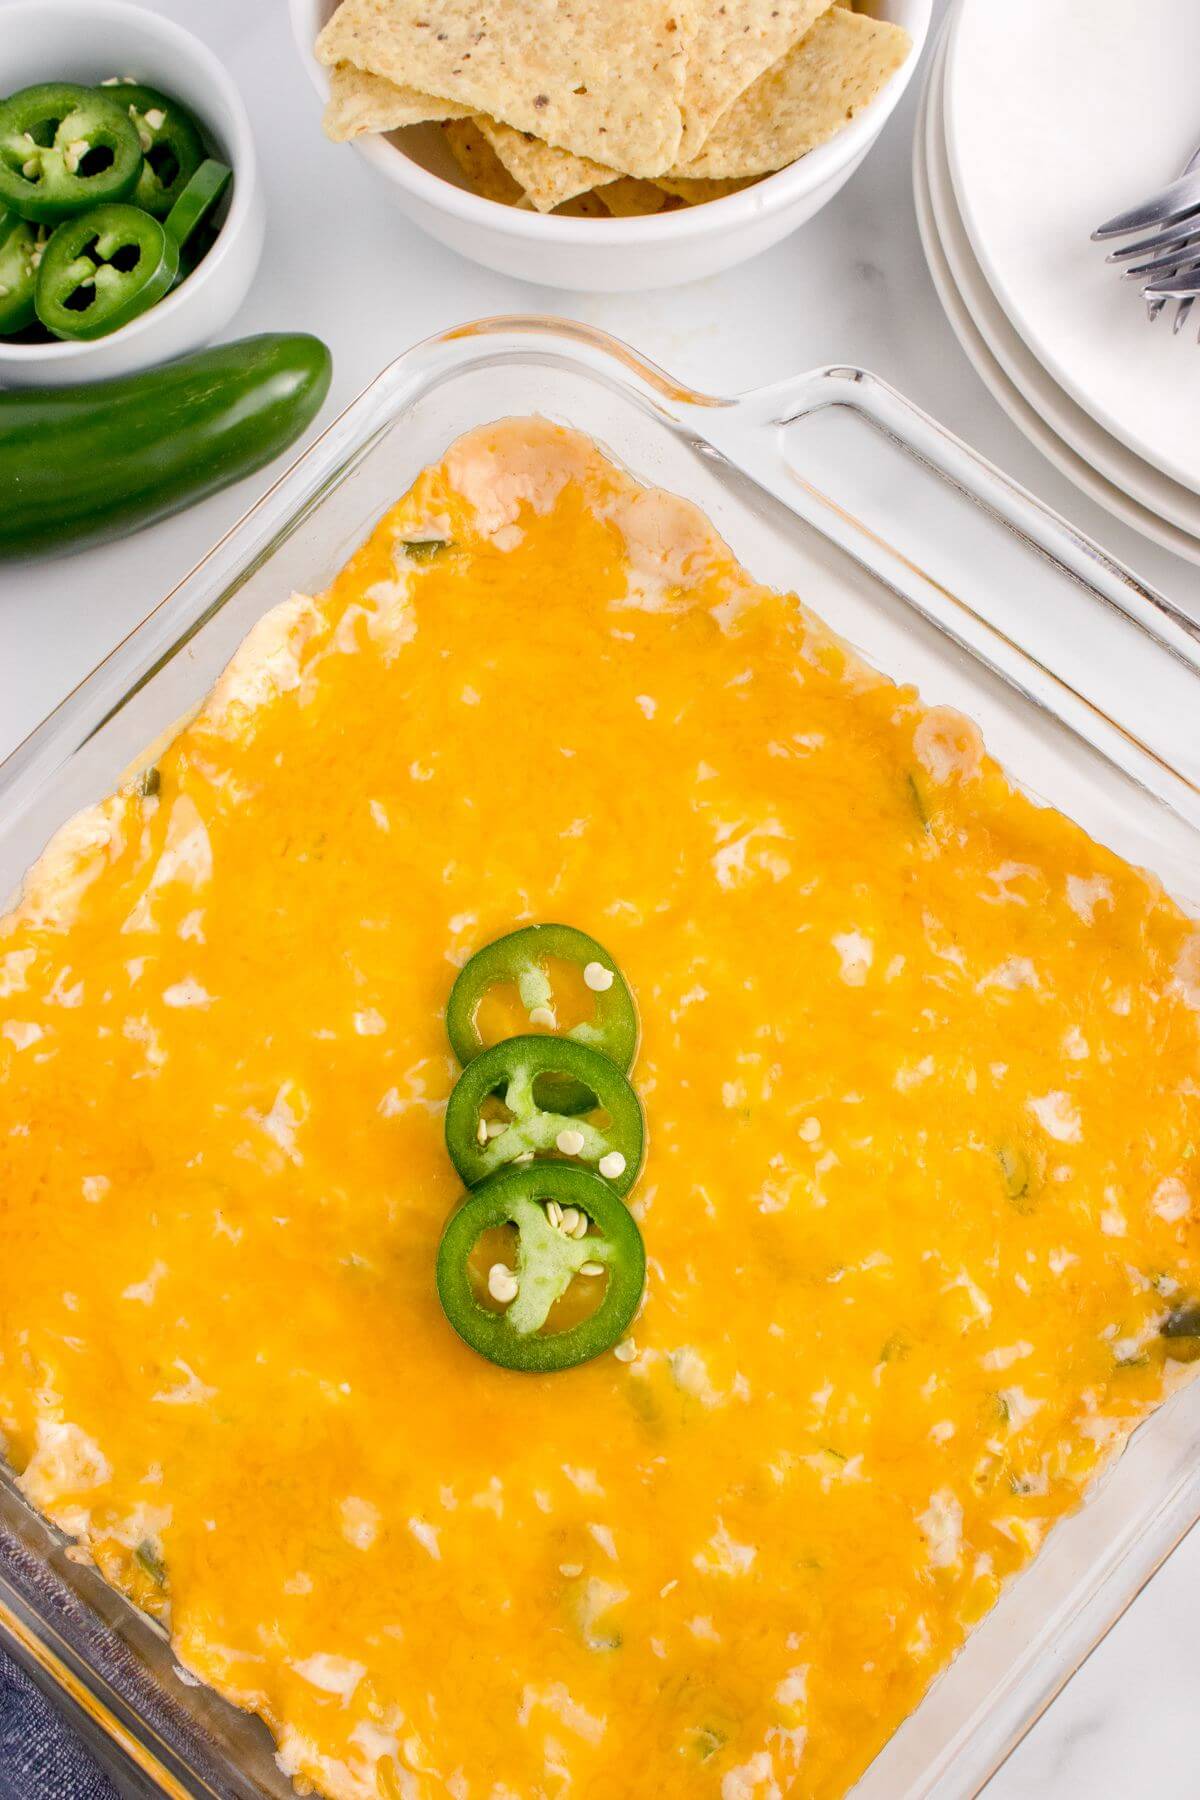 Tortilla chips and jalapenos frame a glass casserole dish covered in yellow cheese.